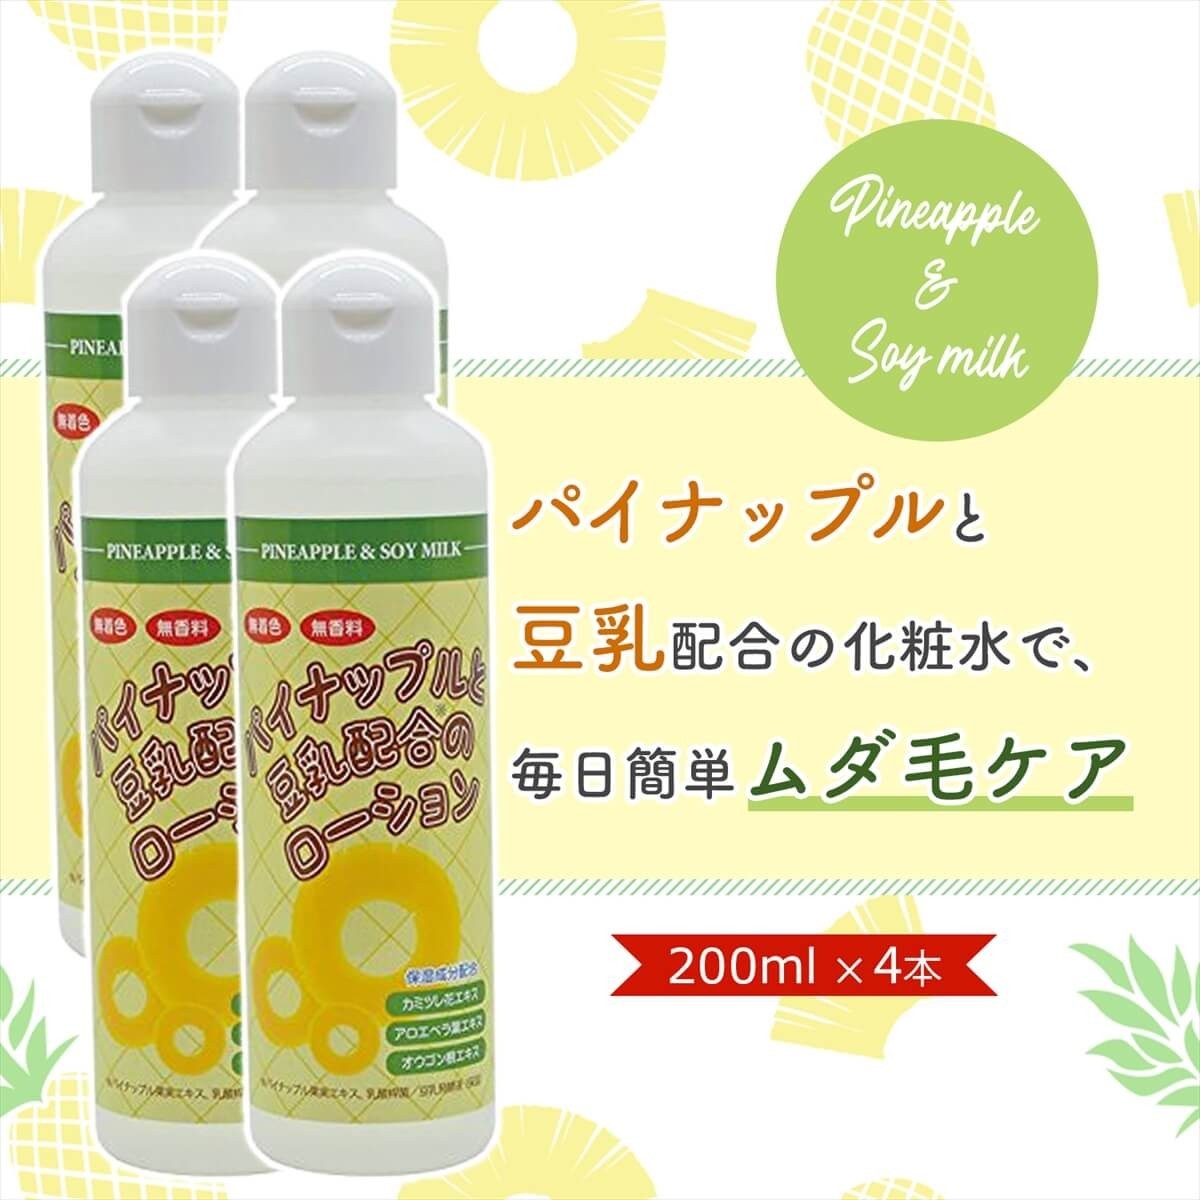  pineapple soybean milk lotion 200ml 4 pcs set men's lady's face lotion moisturizer after care man and woman use child . possible to use 